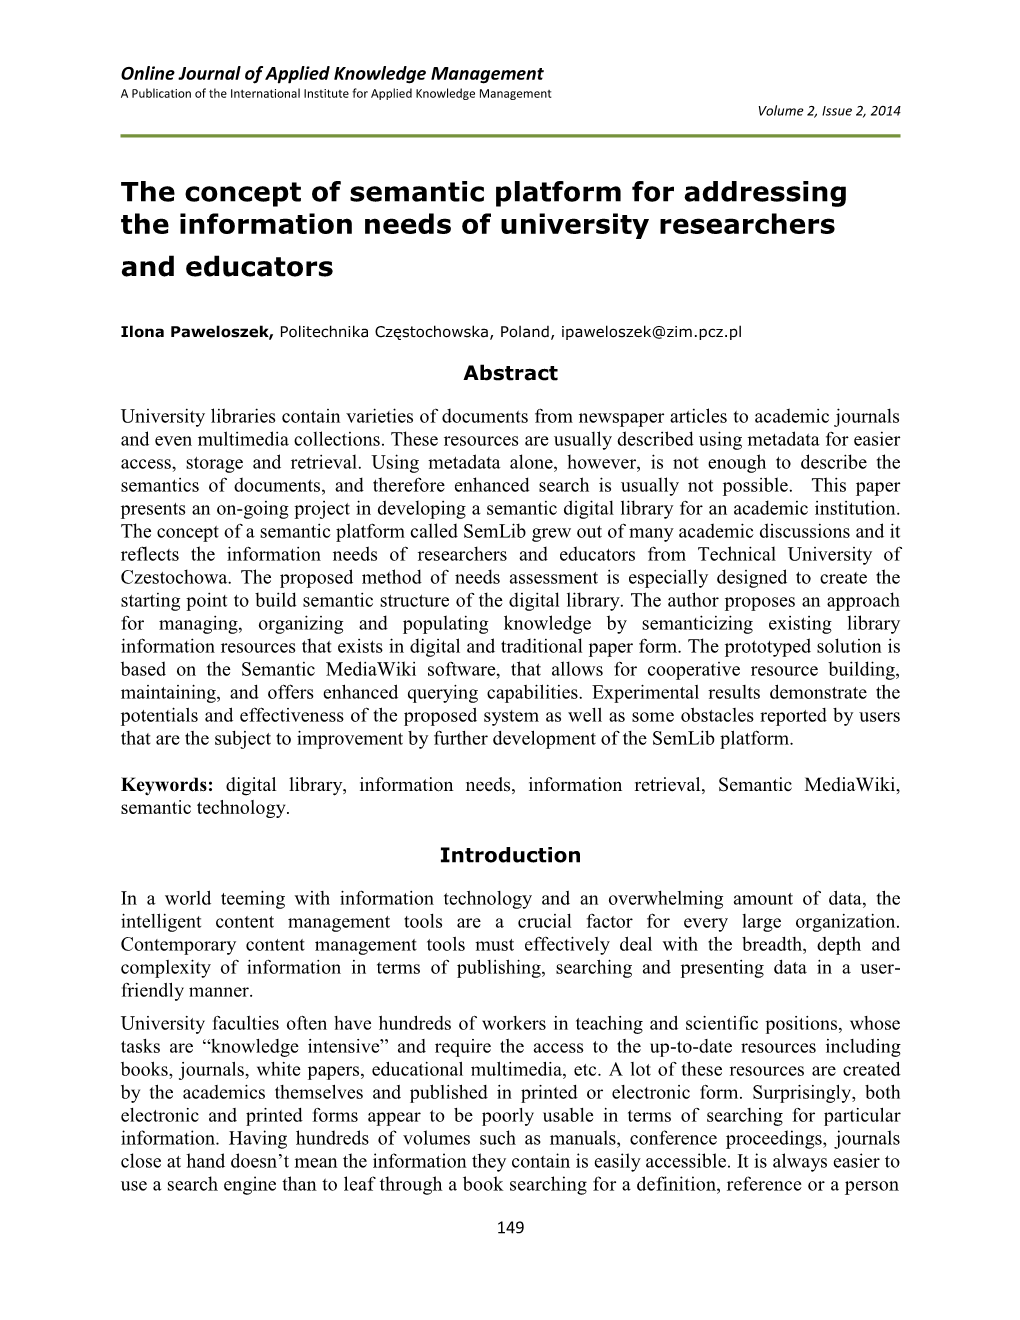 The Concept of Semantic Platform for Addressing the Information Needs of University Researchers and Educators